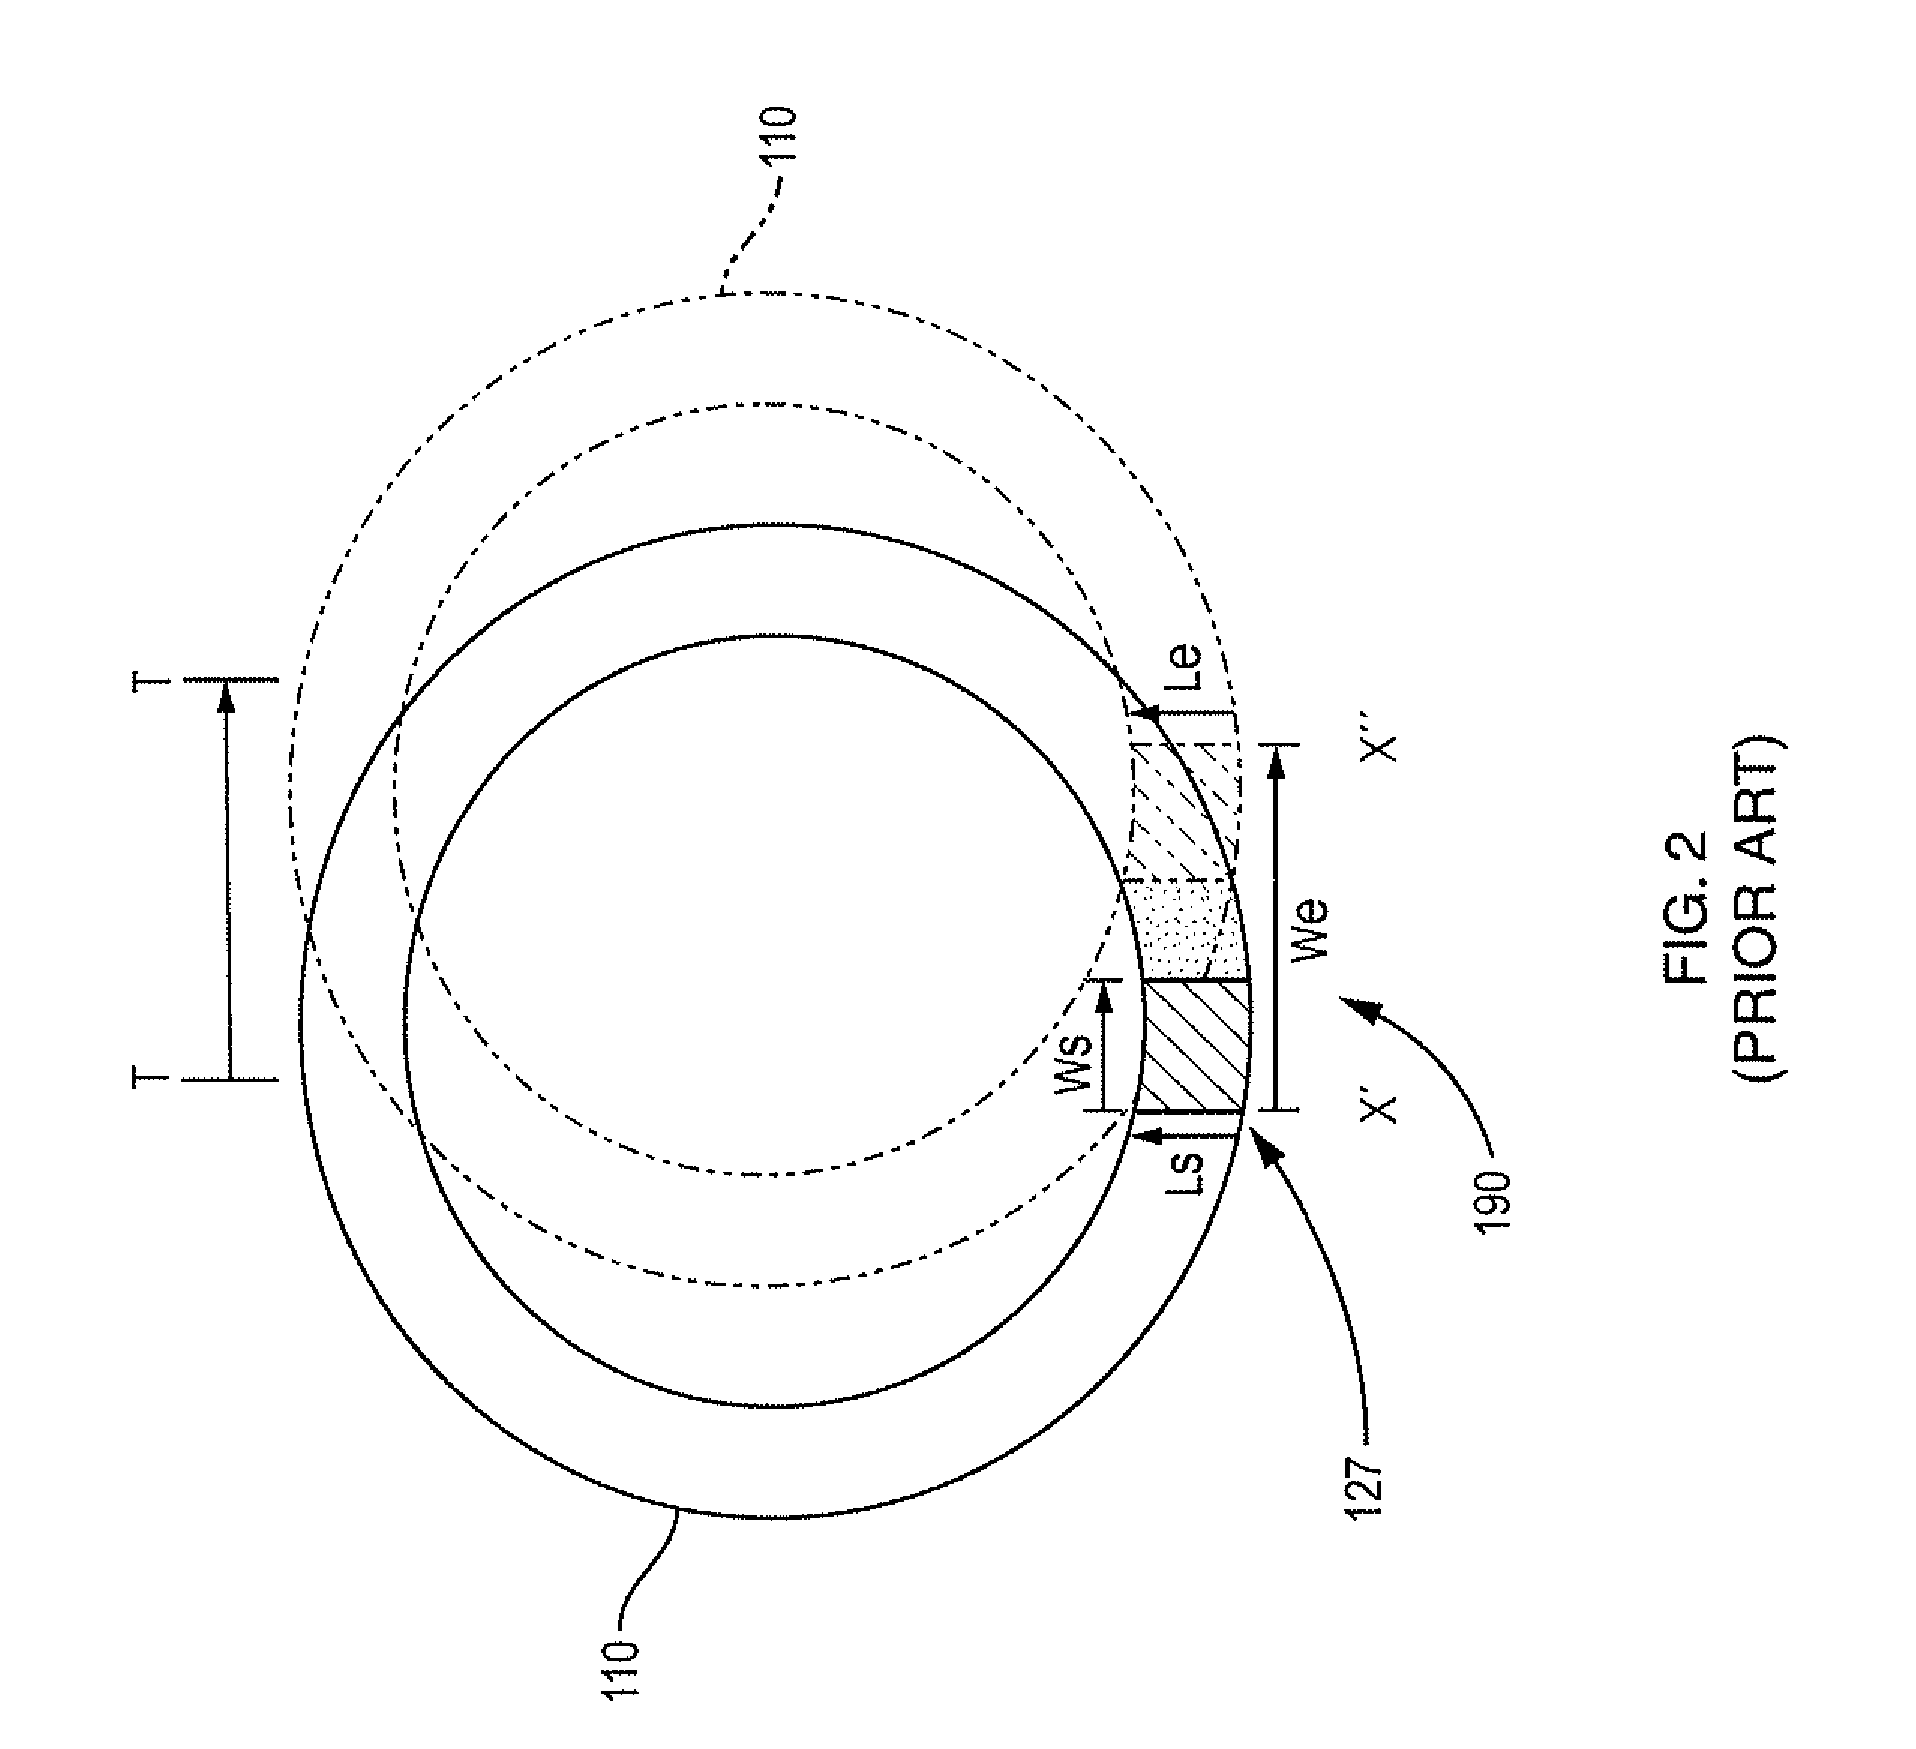 Method and System for Controlling X-Ray Focal Spot Characteristics for Tomoysythesis and Mammography Imaging